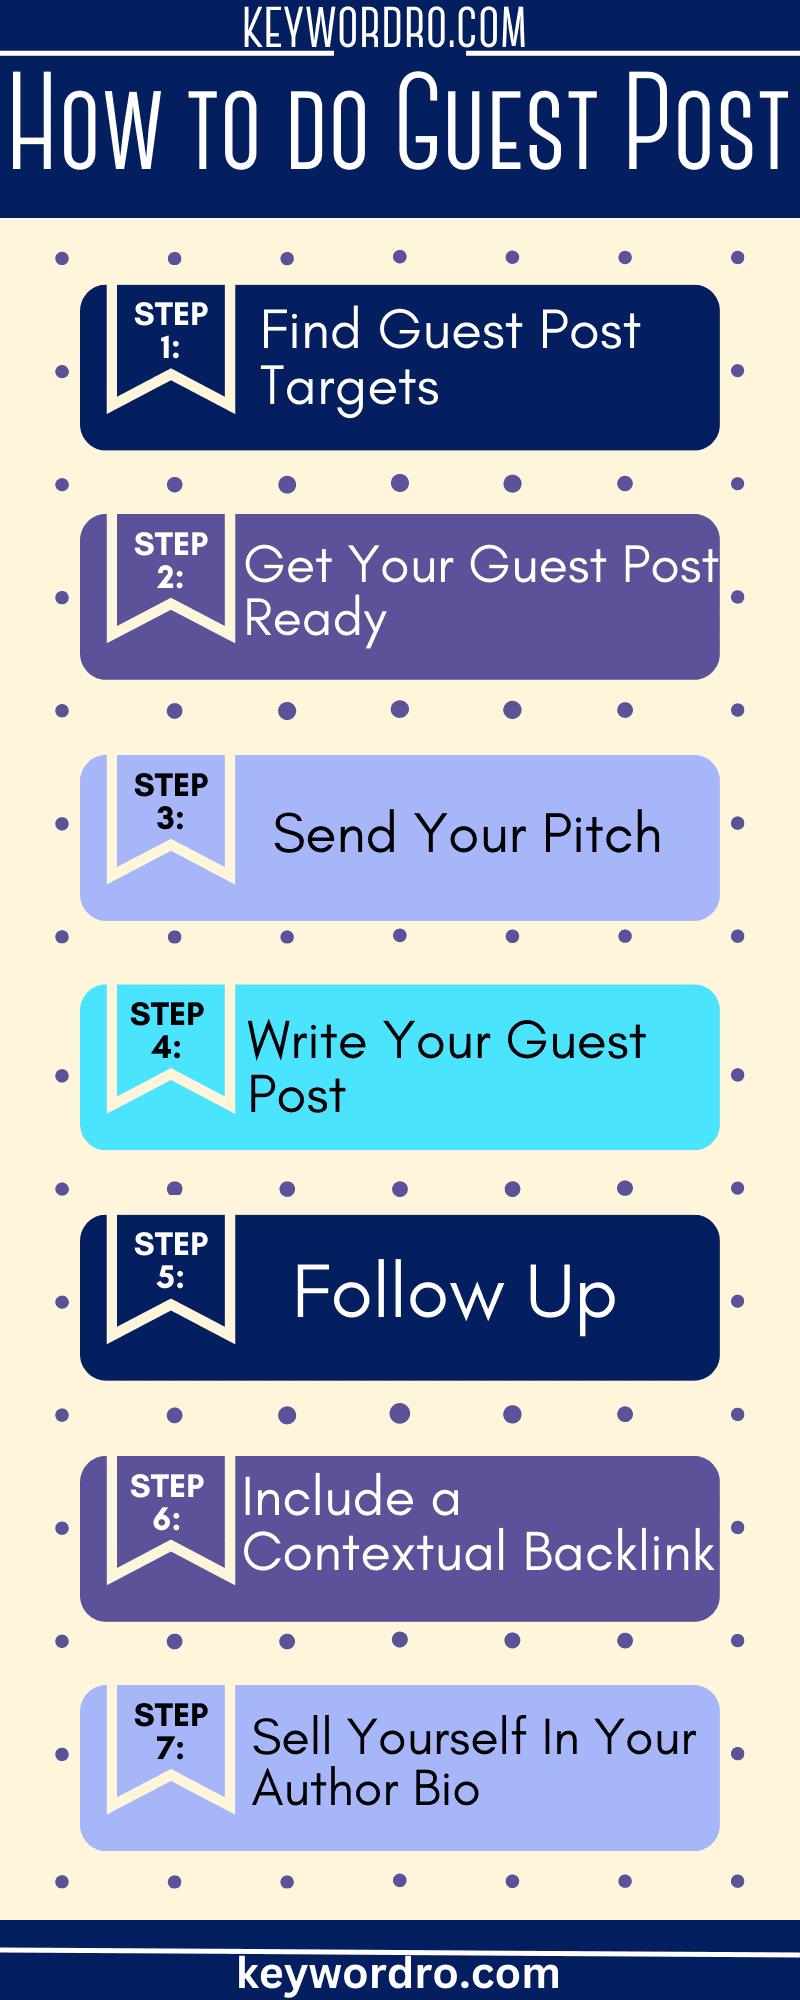 This infographic contain 7 steps of doing guest post